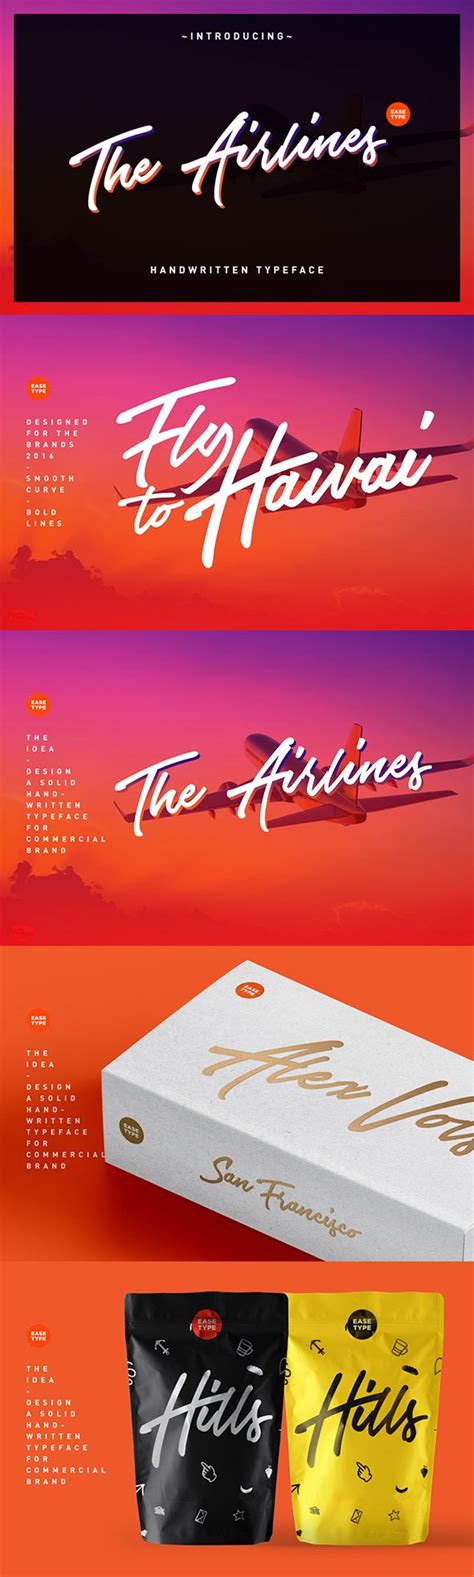 The Airlines Font. Download here: https://graphicriver.net/item/the-airlines/17386217?ref=ksioks ...